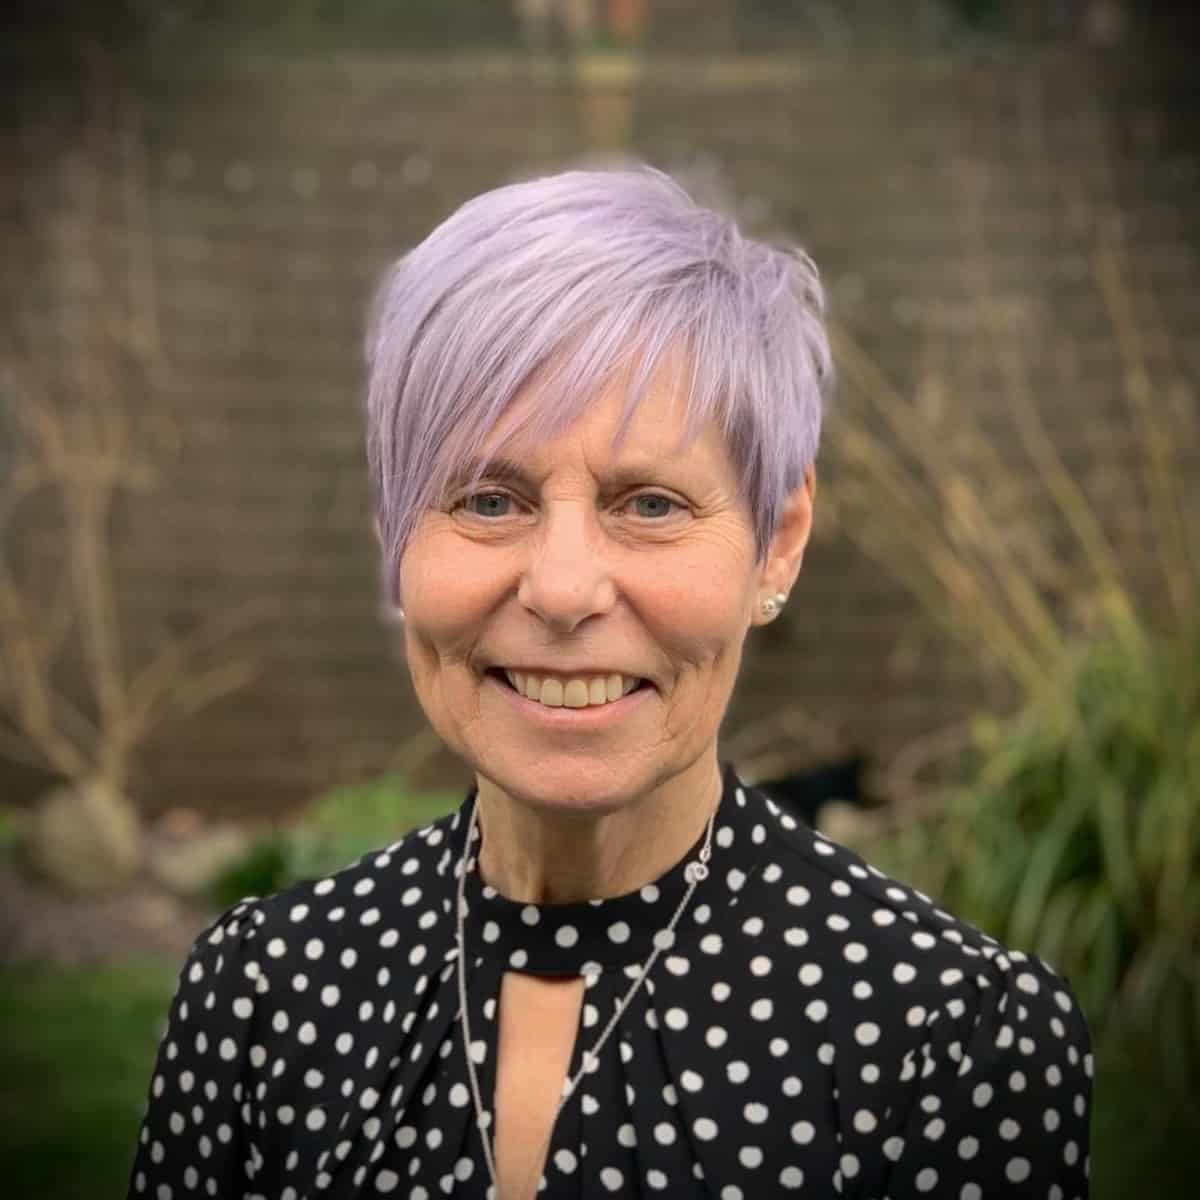 Woman over 60 with a Purple Pixie and Bangs